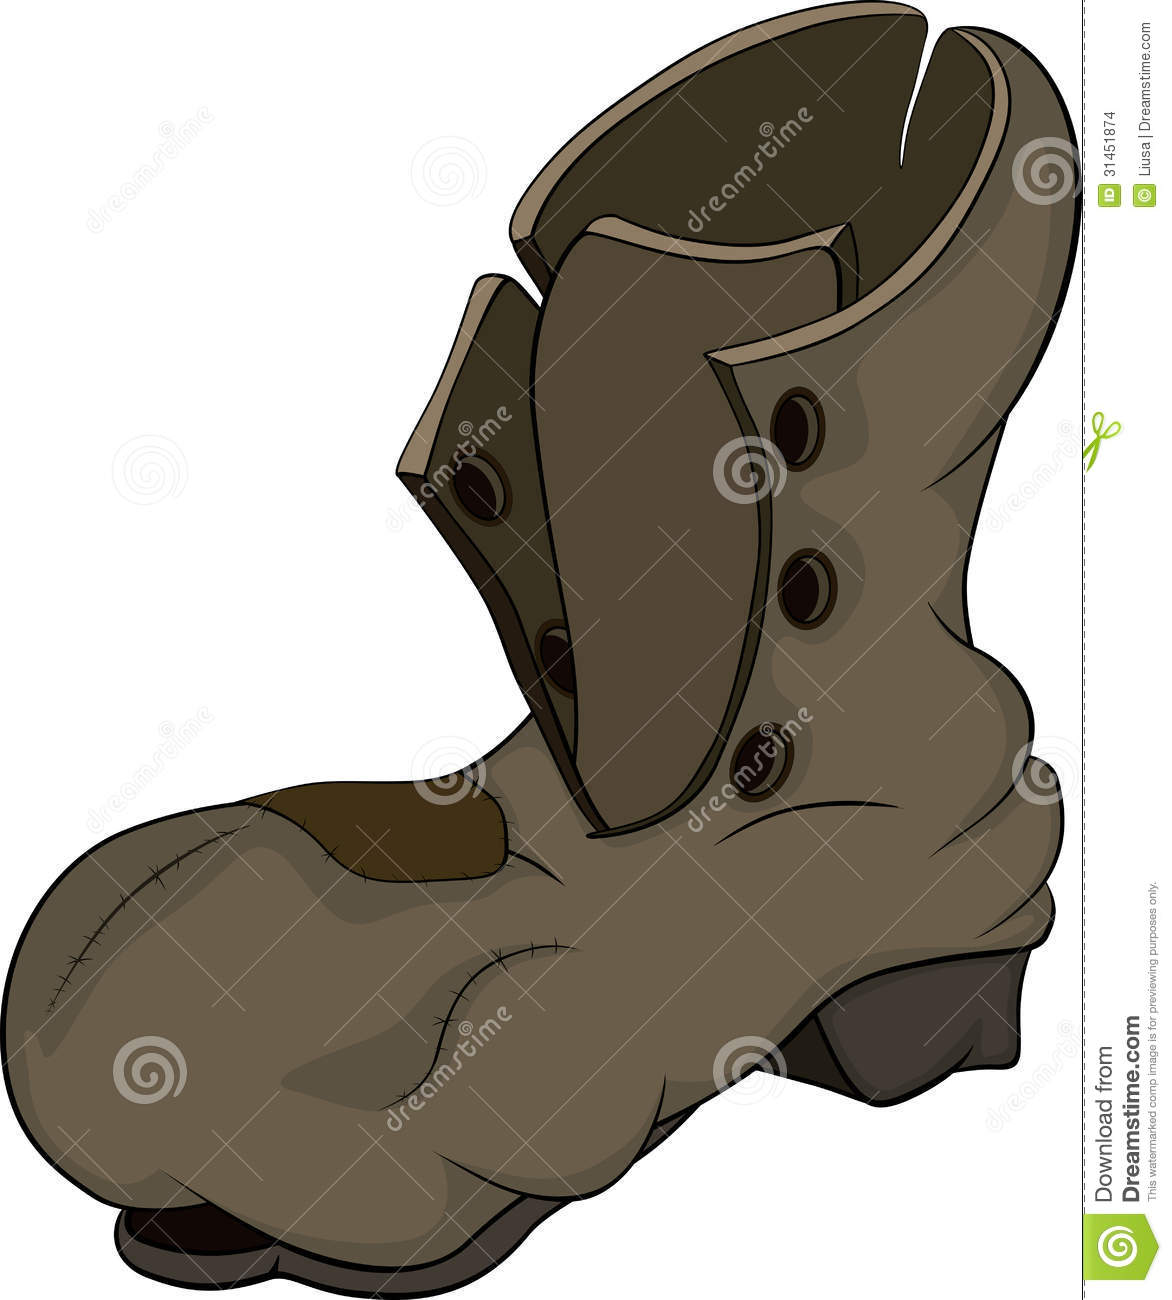 Old Boot Stock Images   Image  31451874